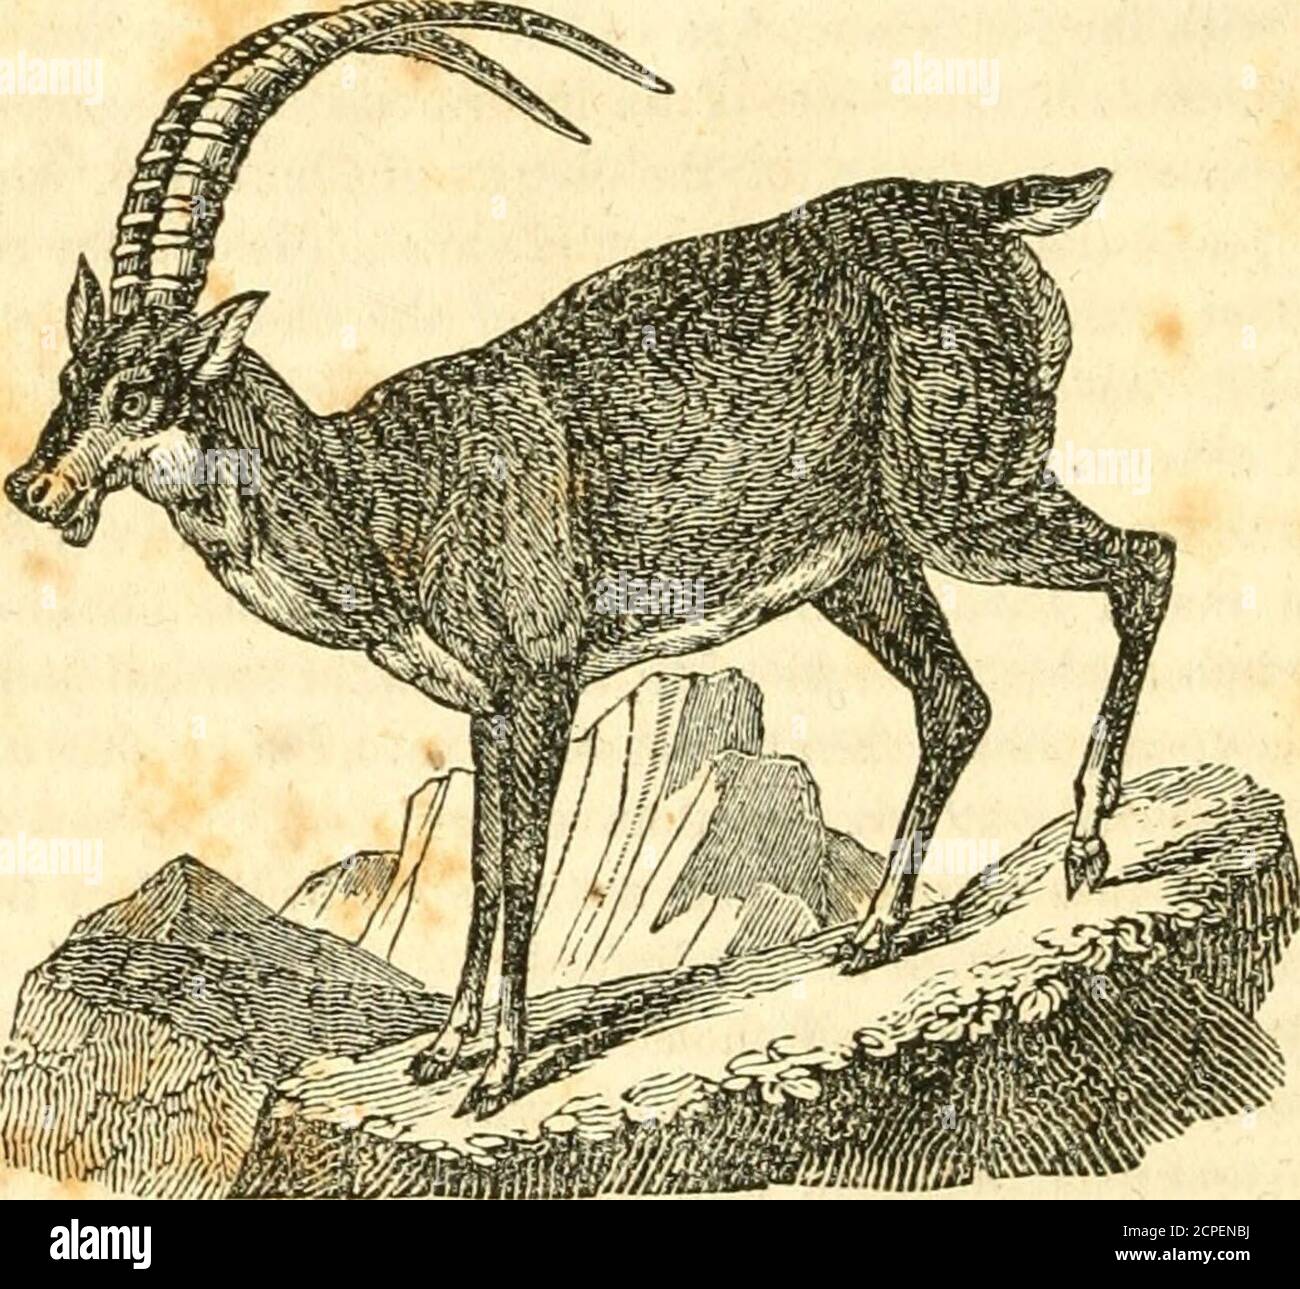 . A System of natural history : containing scientifci [sic] and popular descriptions of man, quadrupeds, birds, fishes, reptiles and insects . r ingTiinal pores ; ears pointed; legs robust; tail short;chin bearded. 368 MAMMALIA—IBEX. two slight differences, the one externally, and the other internally. Thehorns of the ibex are longer than those of the he-goat; they have two longi-tudinal ridges, those of the goat have but one. They have also thick knots,or transverse tubercles, which mark the number of years of their growth;while those of the goats are only marked with transverse strokes. Thei Stock Photo